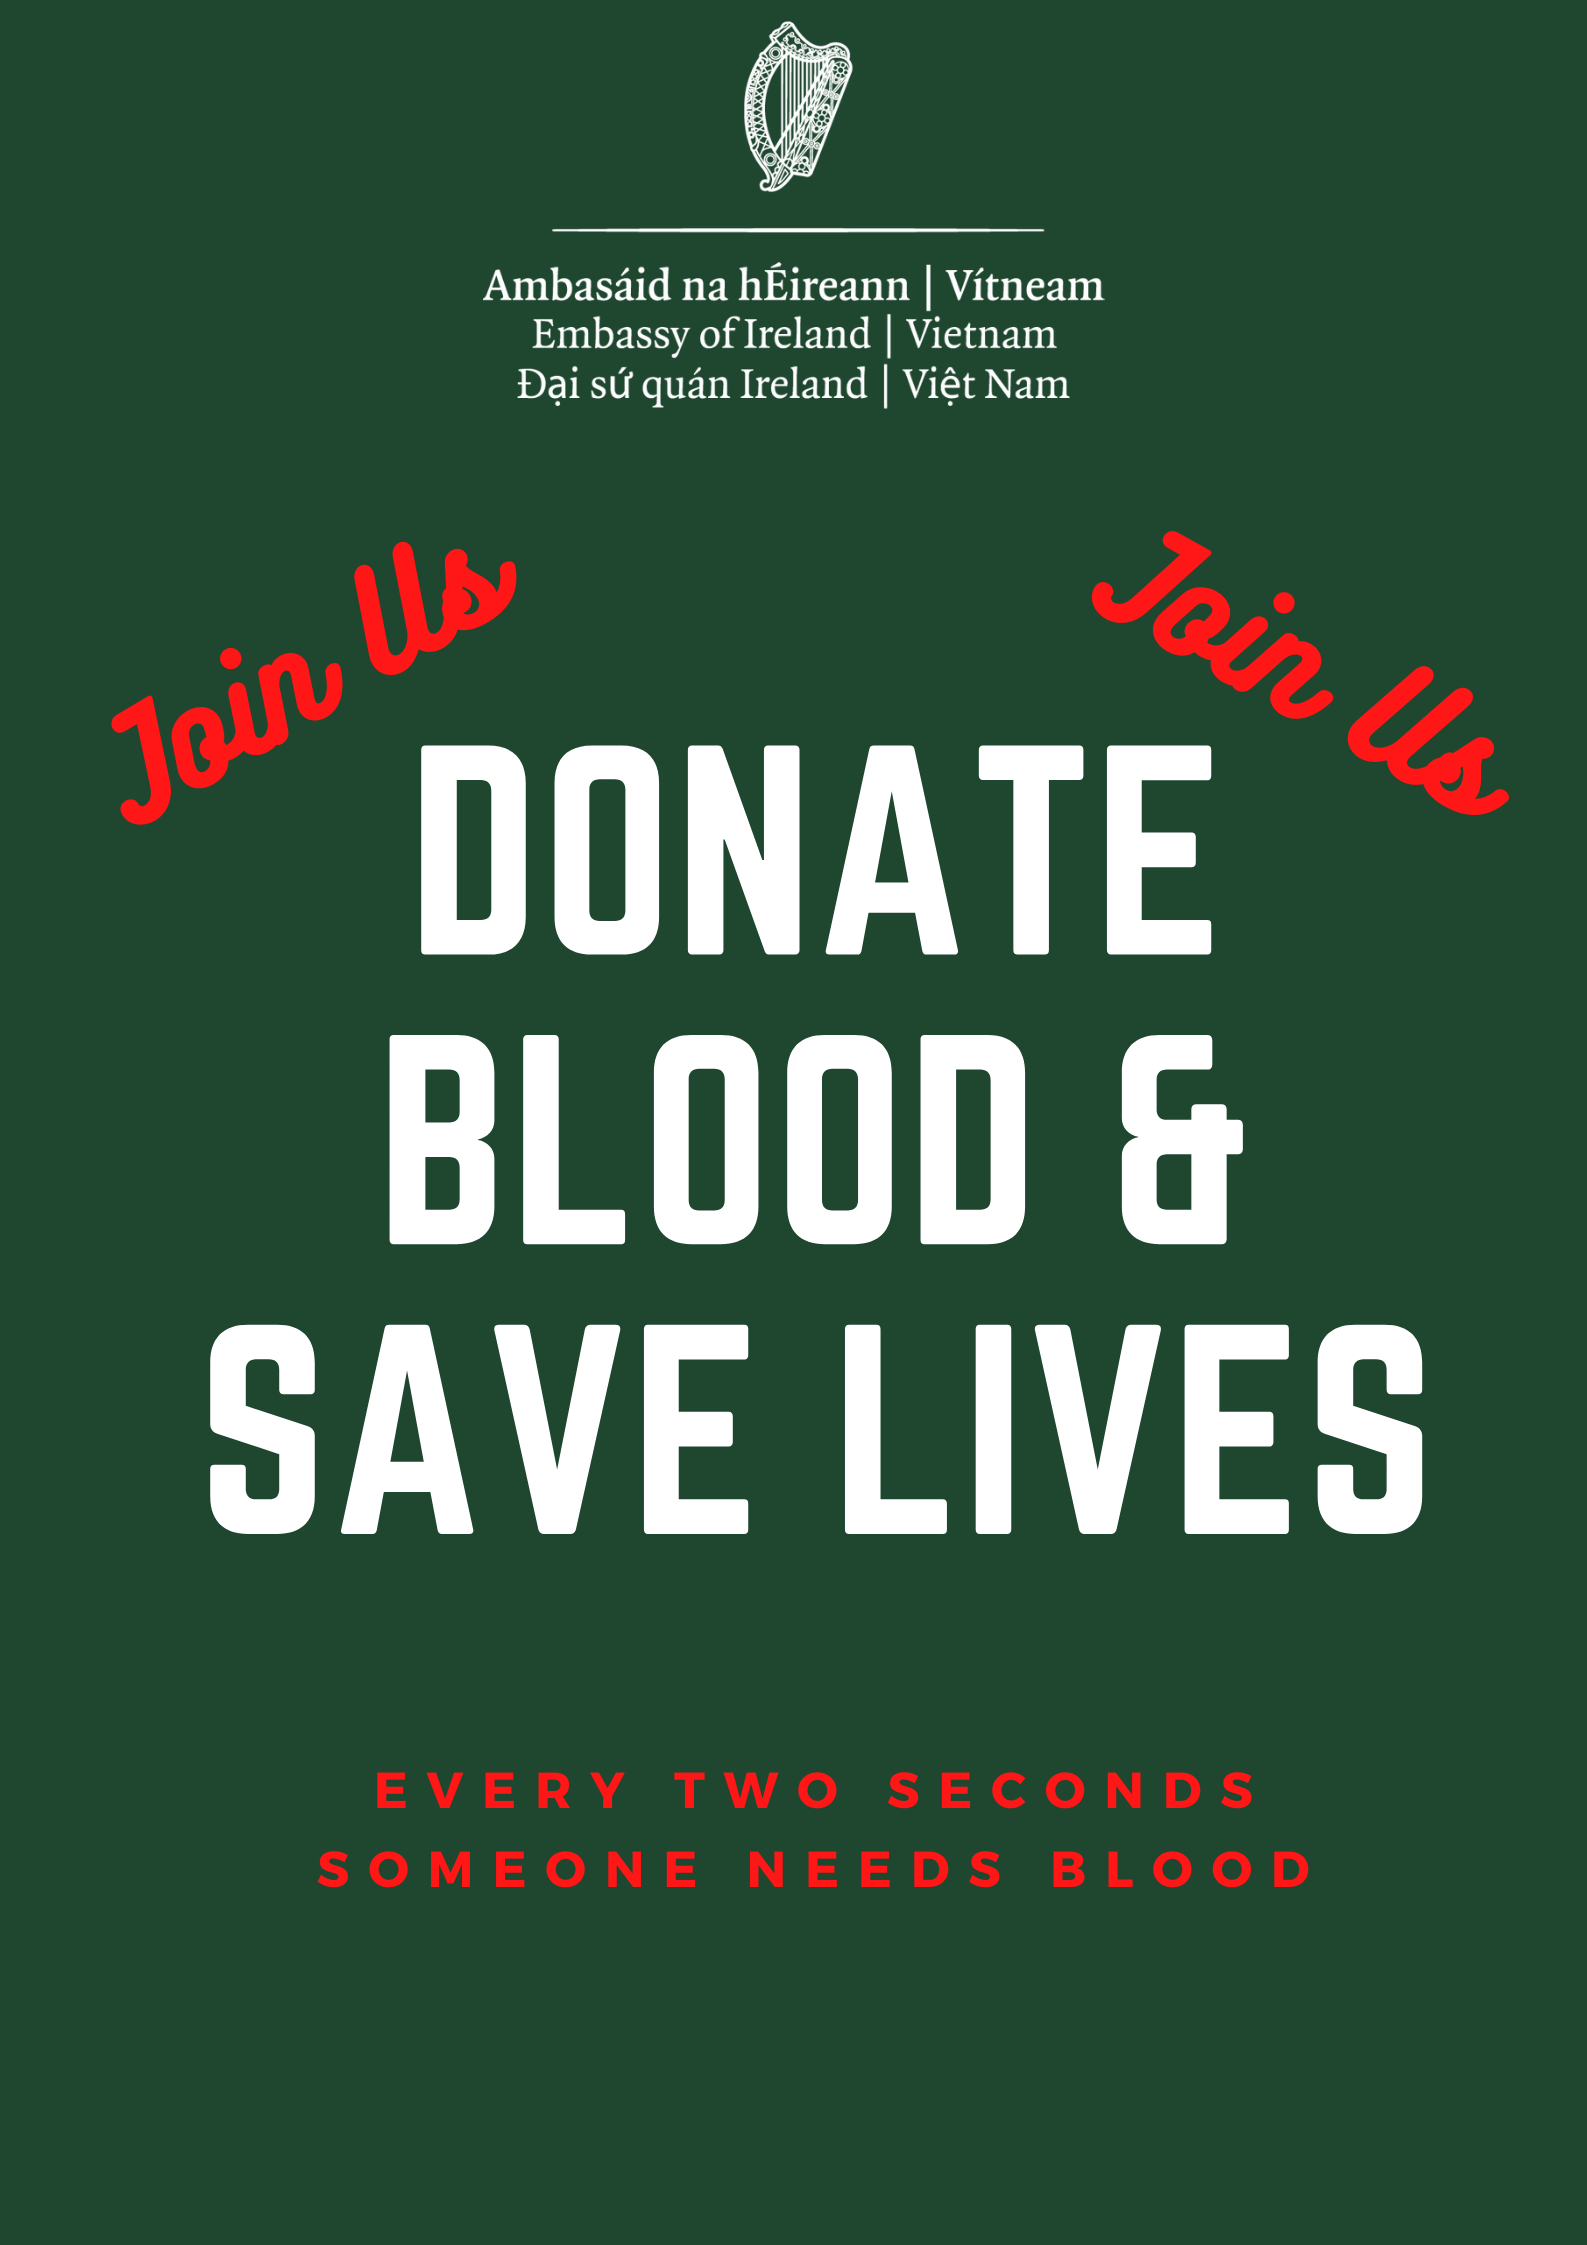 St. Patrick’s Day Blood Donations